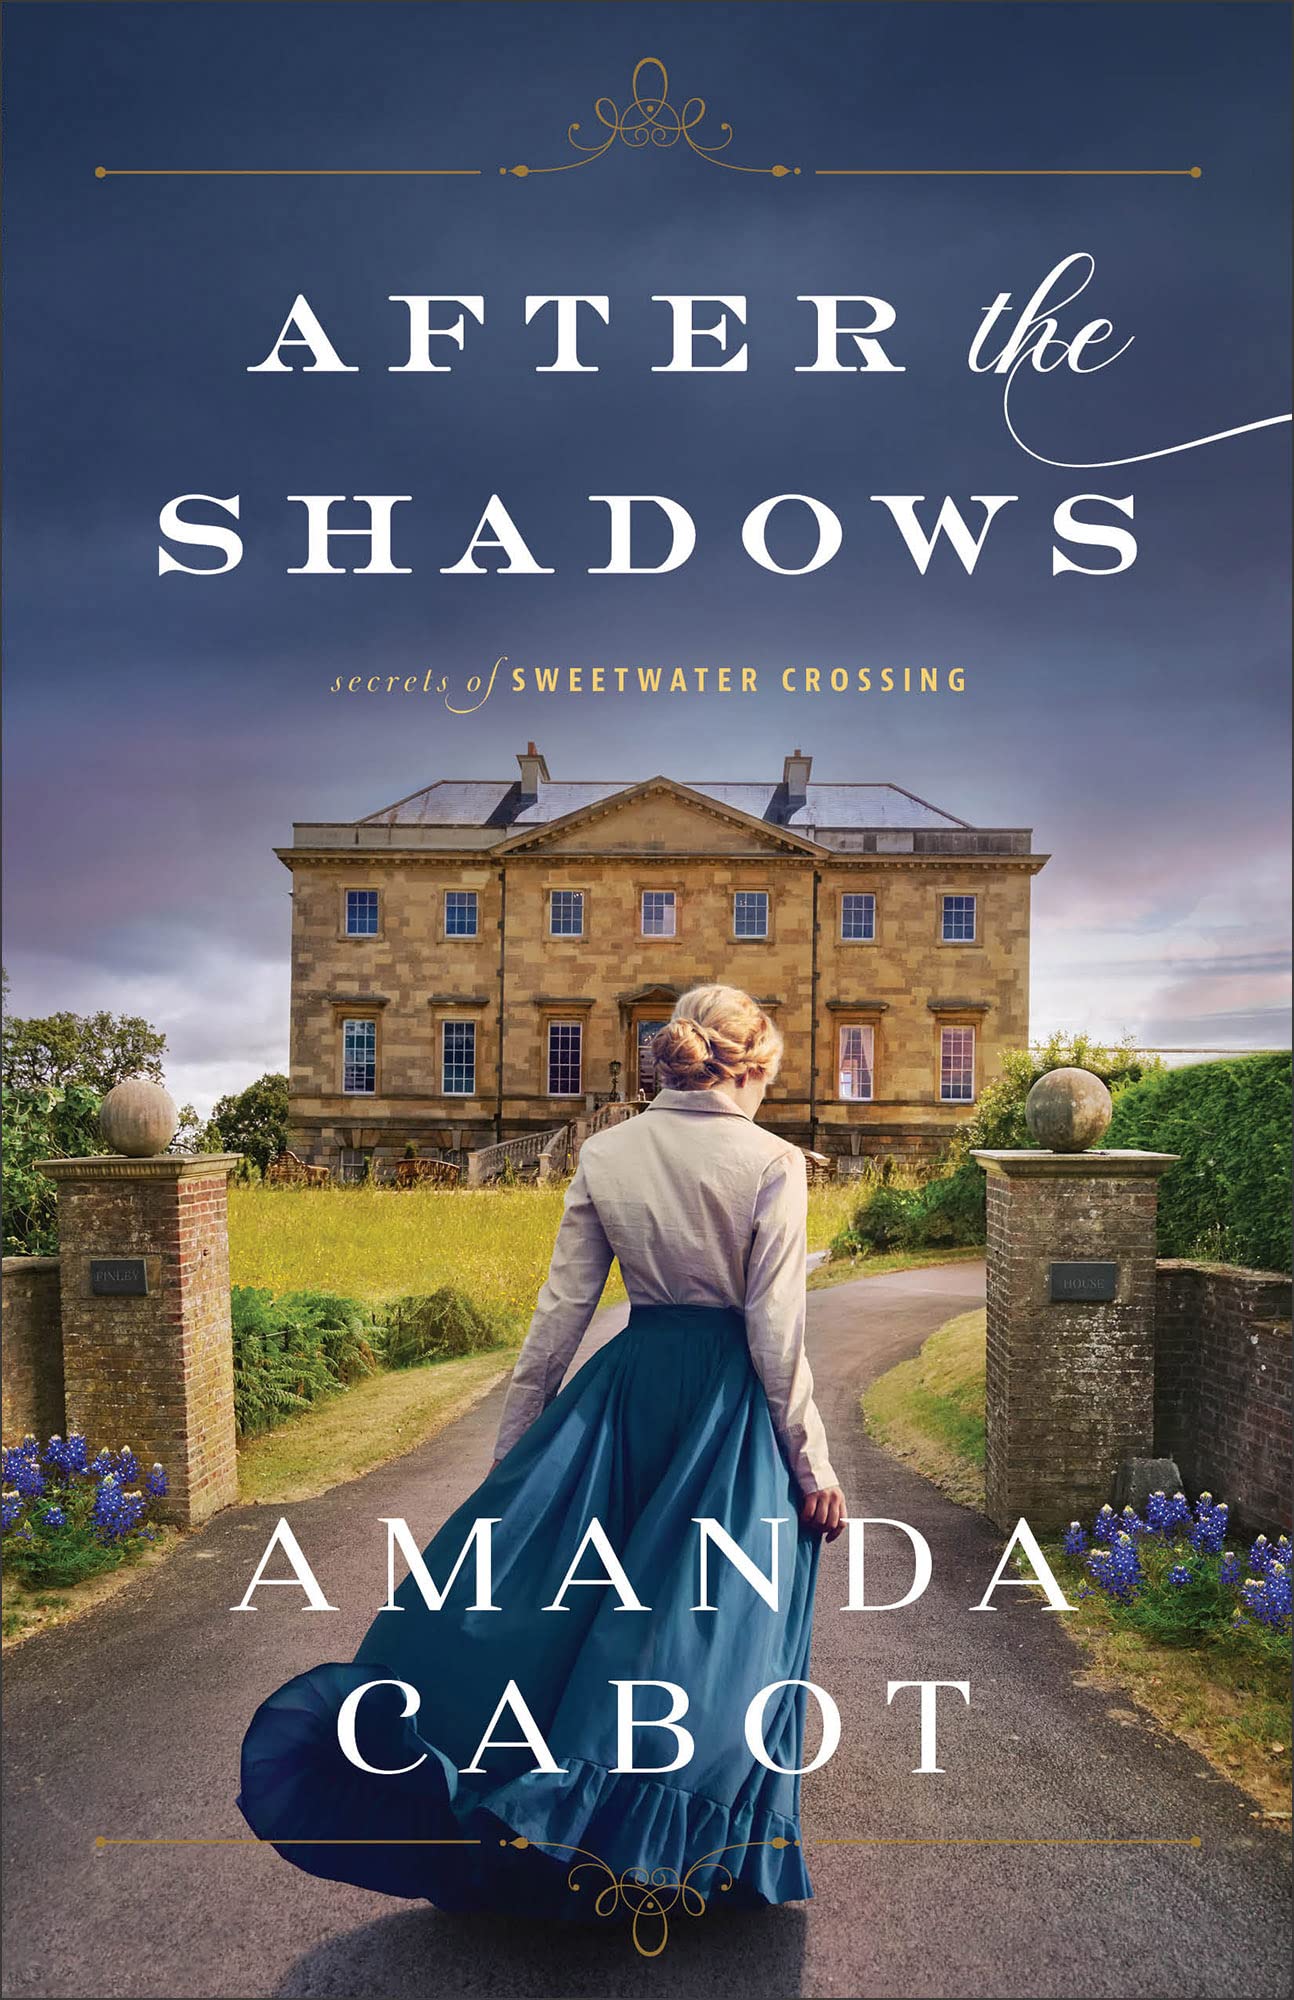 After the Shadows by Amanda Cabot PDF Download